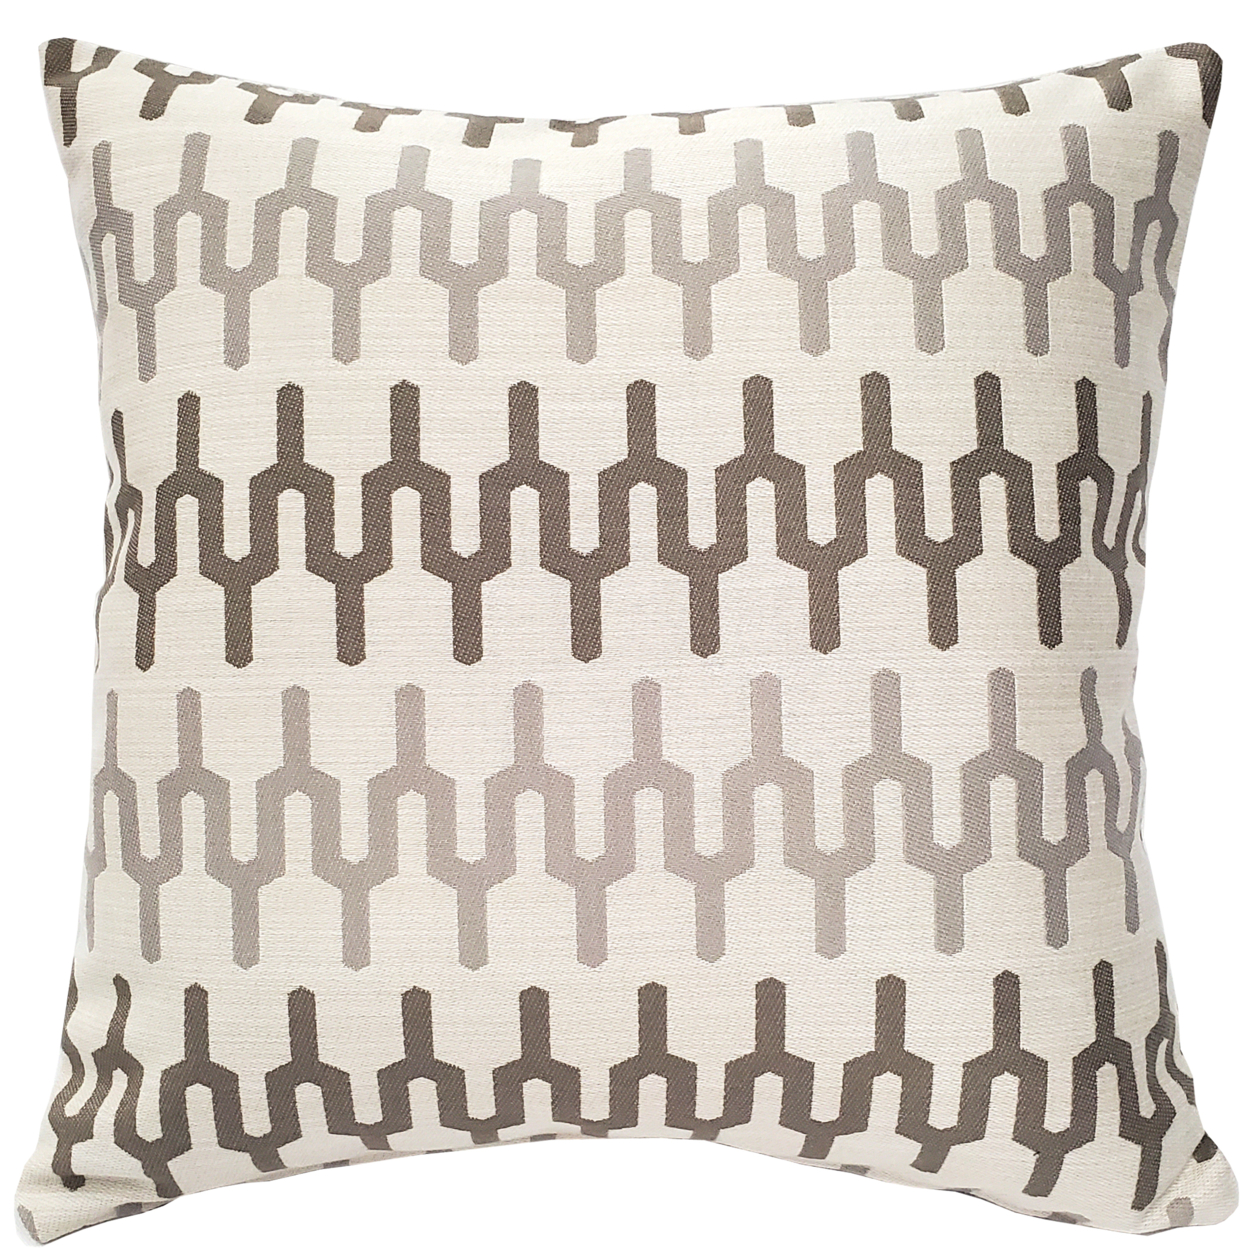 Wake Stone Edge Geometric Outdoor Pillow 19x19, With Polyfill Insert